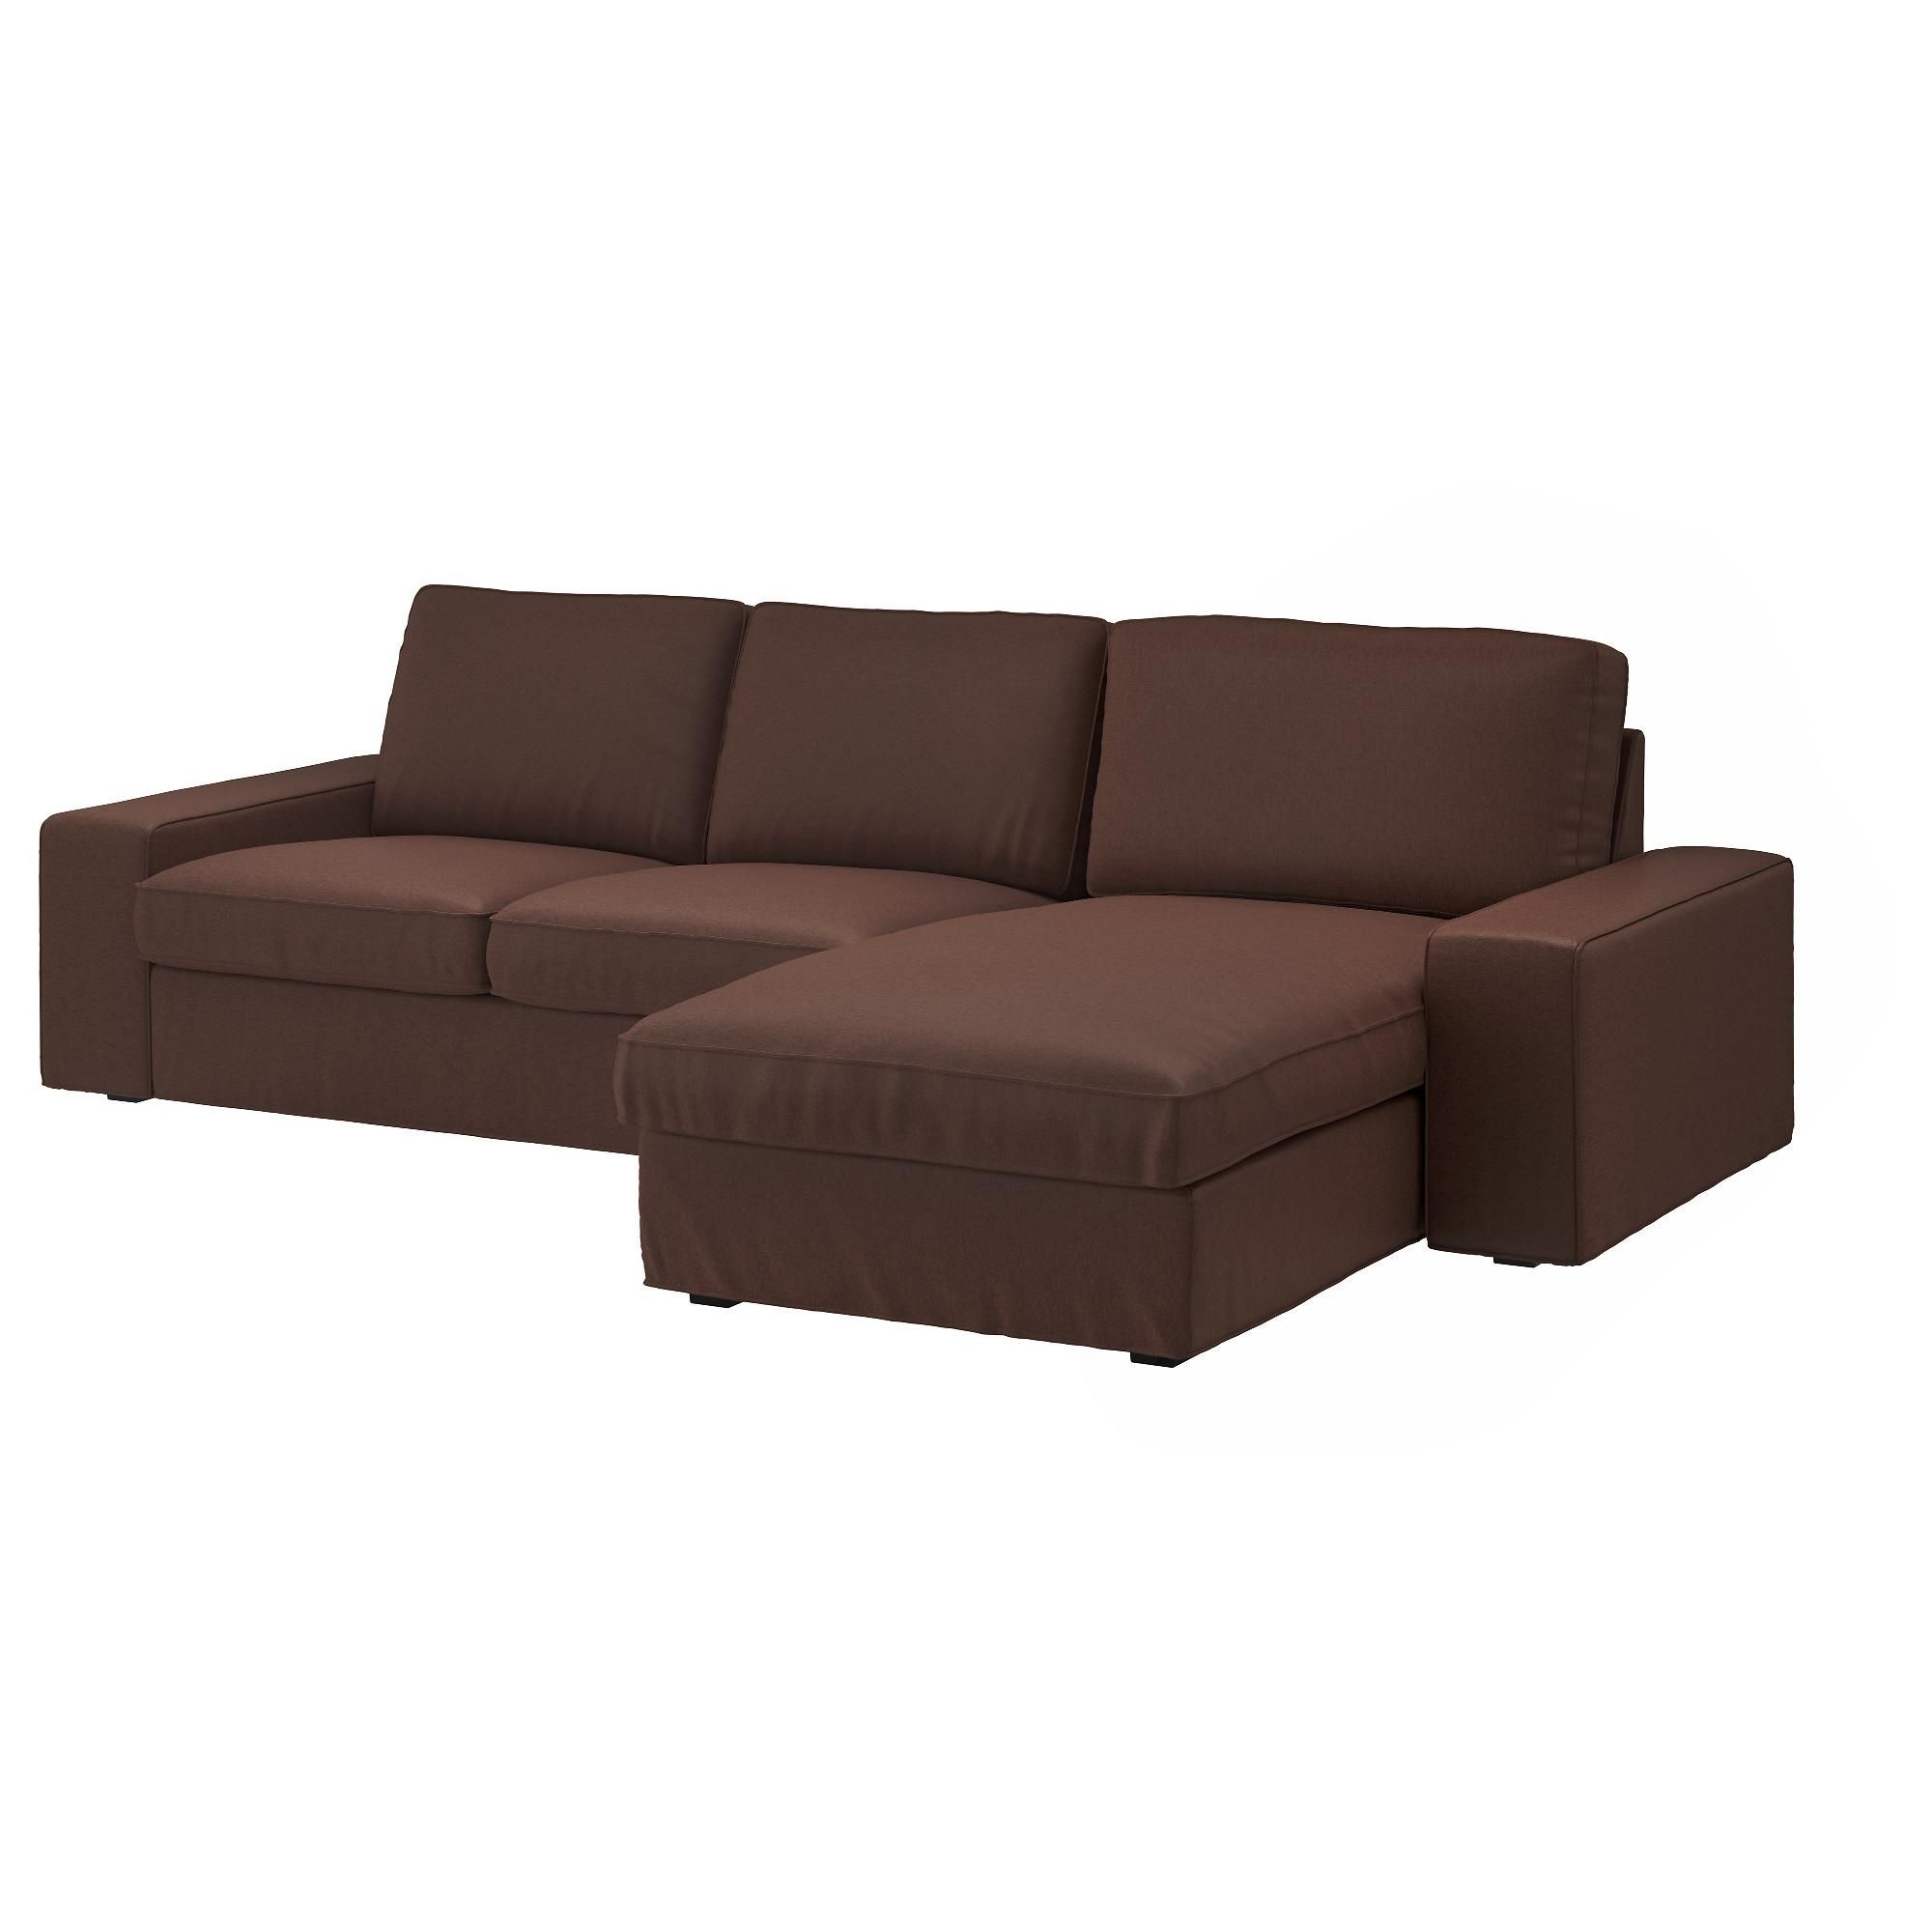 Small Modular Sofa With Design Gallery 32266 | Kengire Throughout Small Modular Sofas (View 15 of 20)